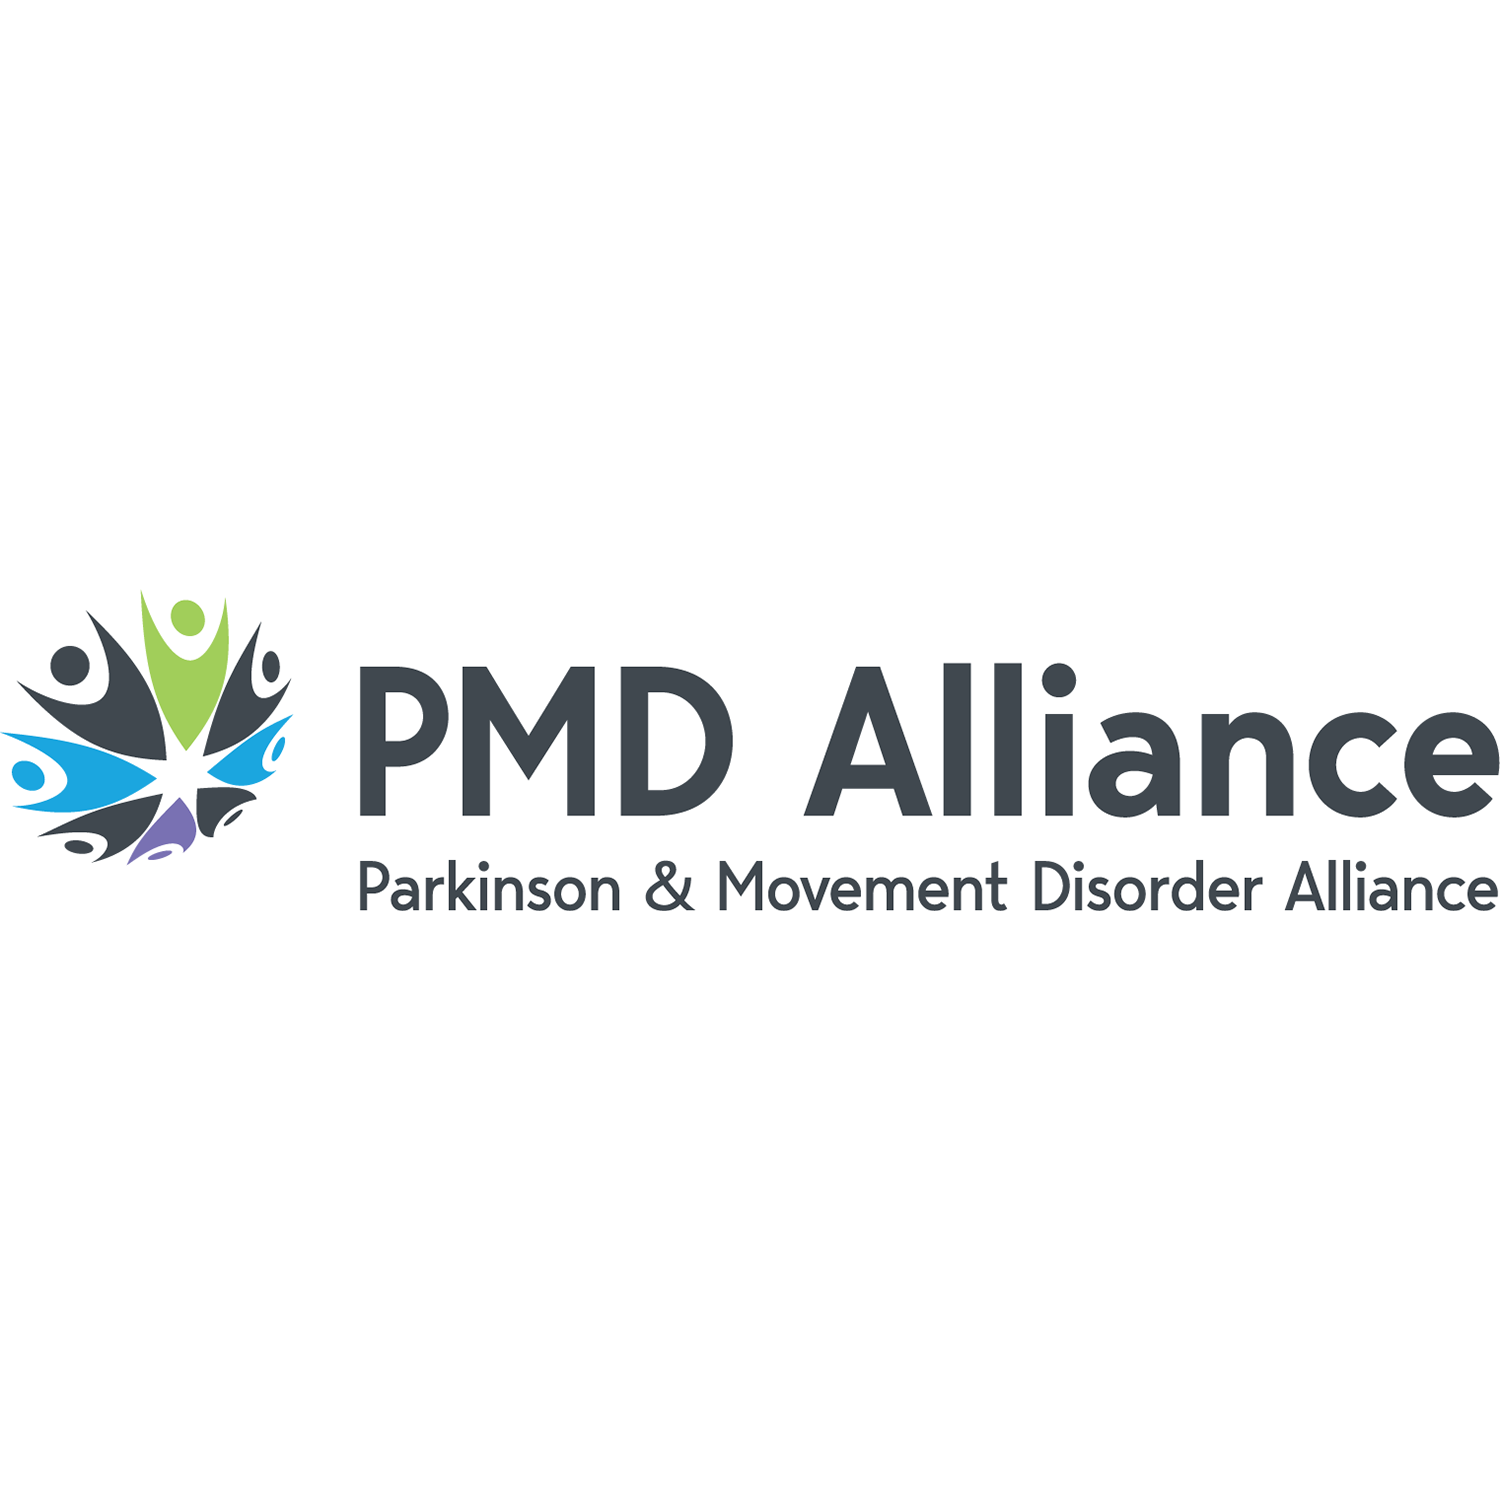 Parkinson & Movement Disorder Alliance (PMD Alliance) has received initial accreditation from the Accreditation Council for Continuing Medical Education (ACCME) to provide continuing medical education (CME).